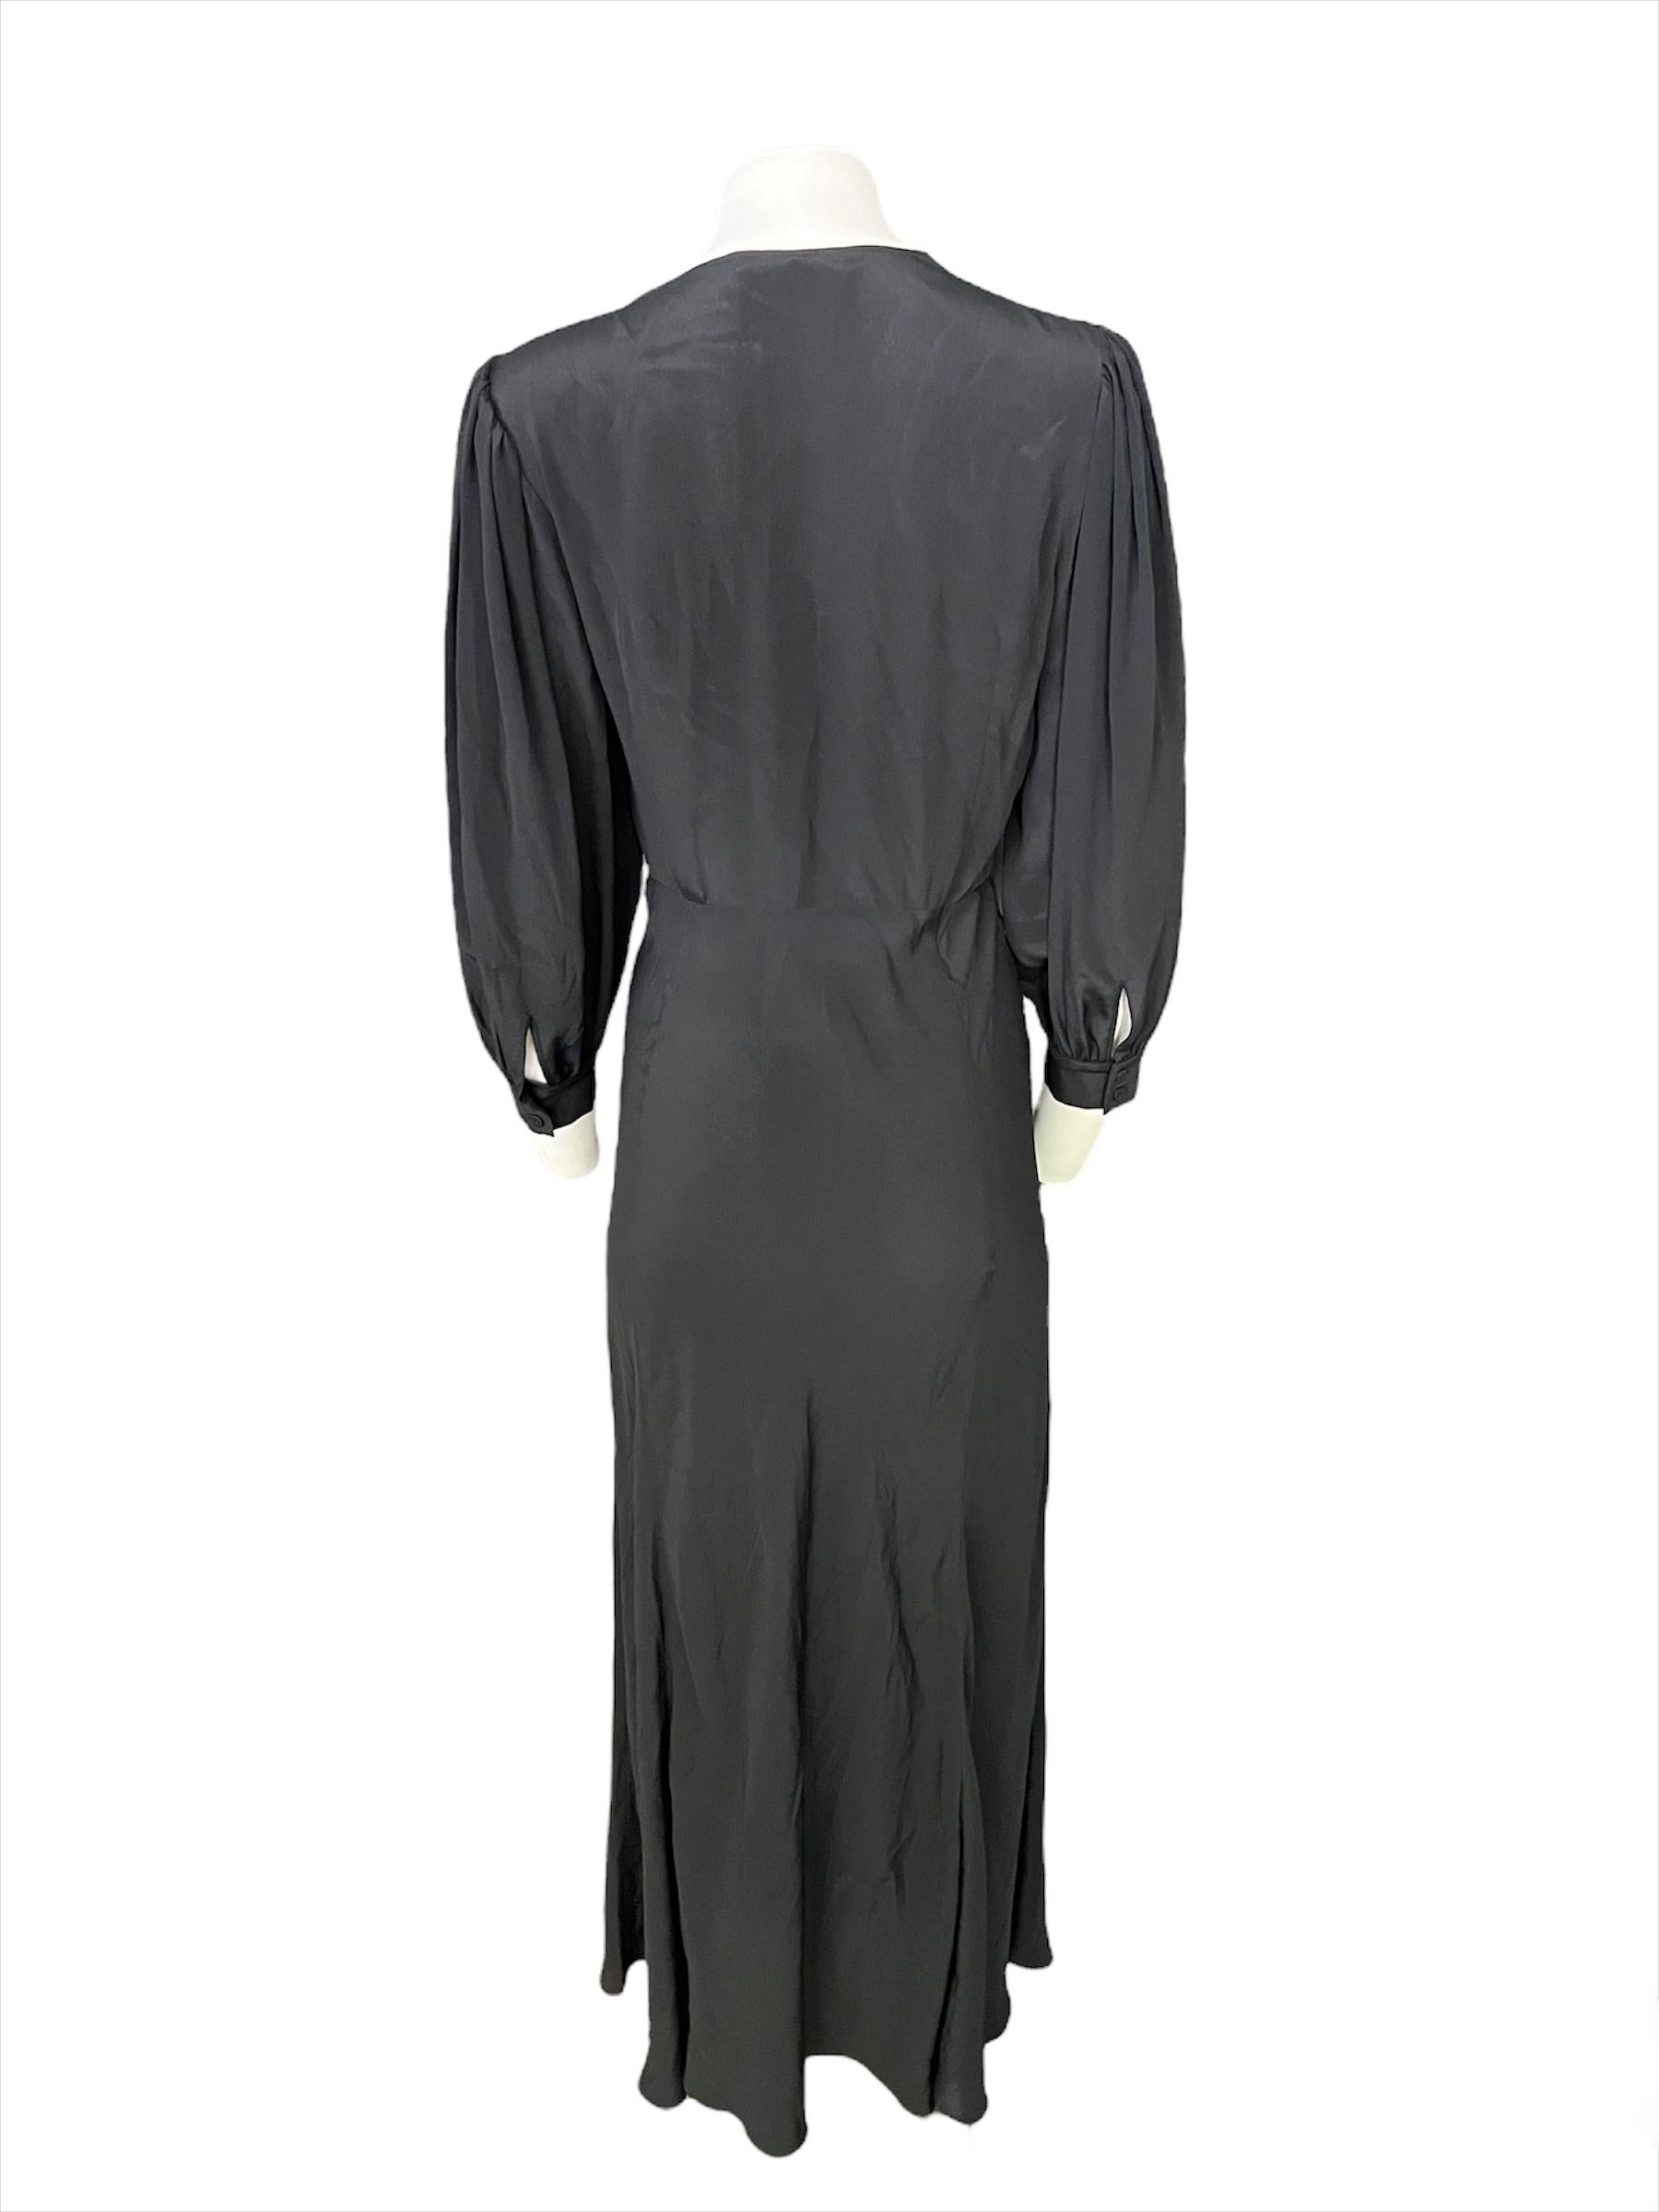 - Long balloon sleeves with double button closure
- Deep V neckline
- Floor length
- Concealed side zip closure